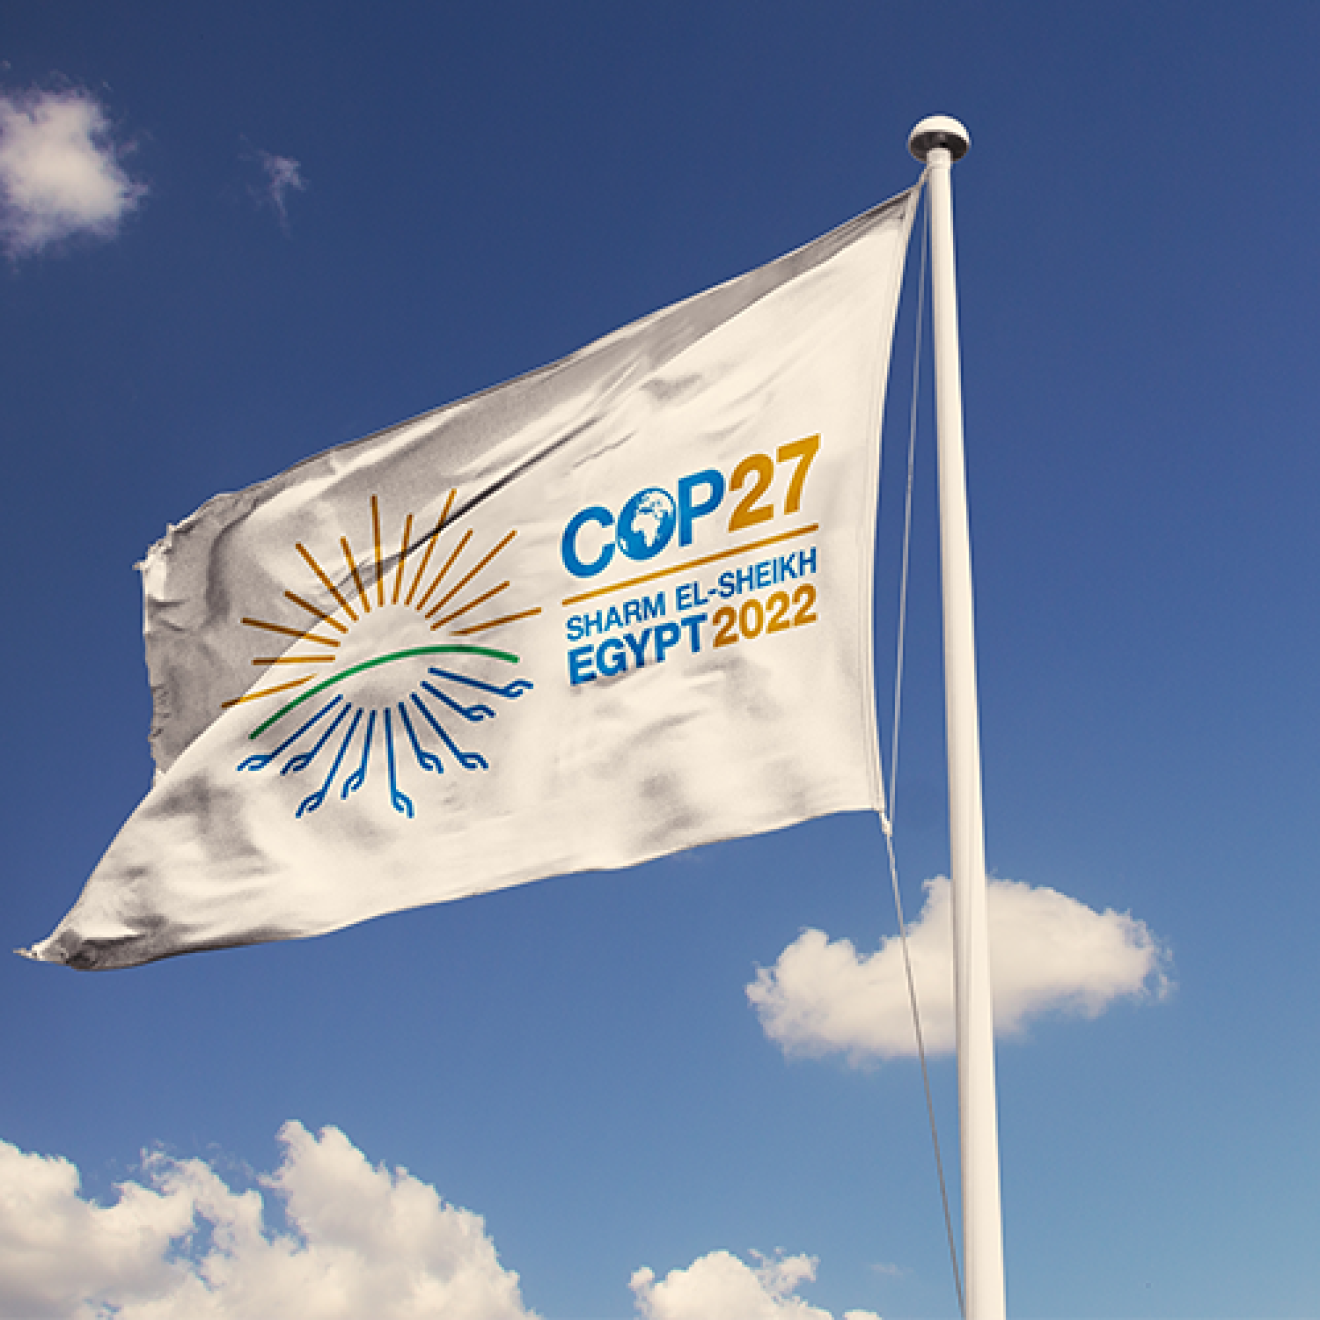 COP27 climate summit flag